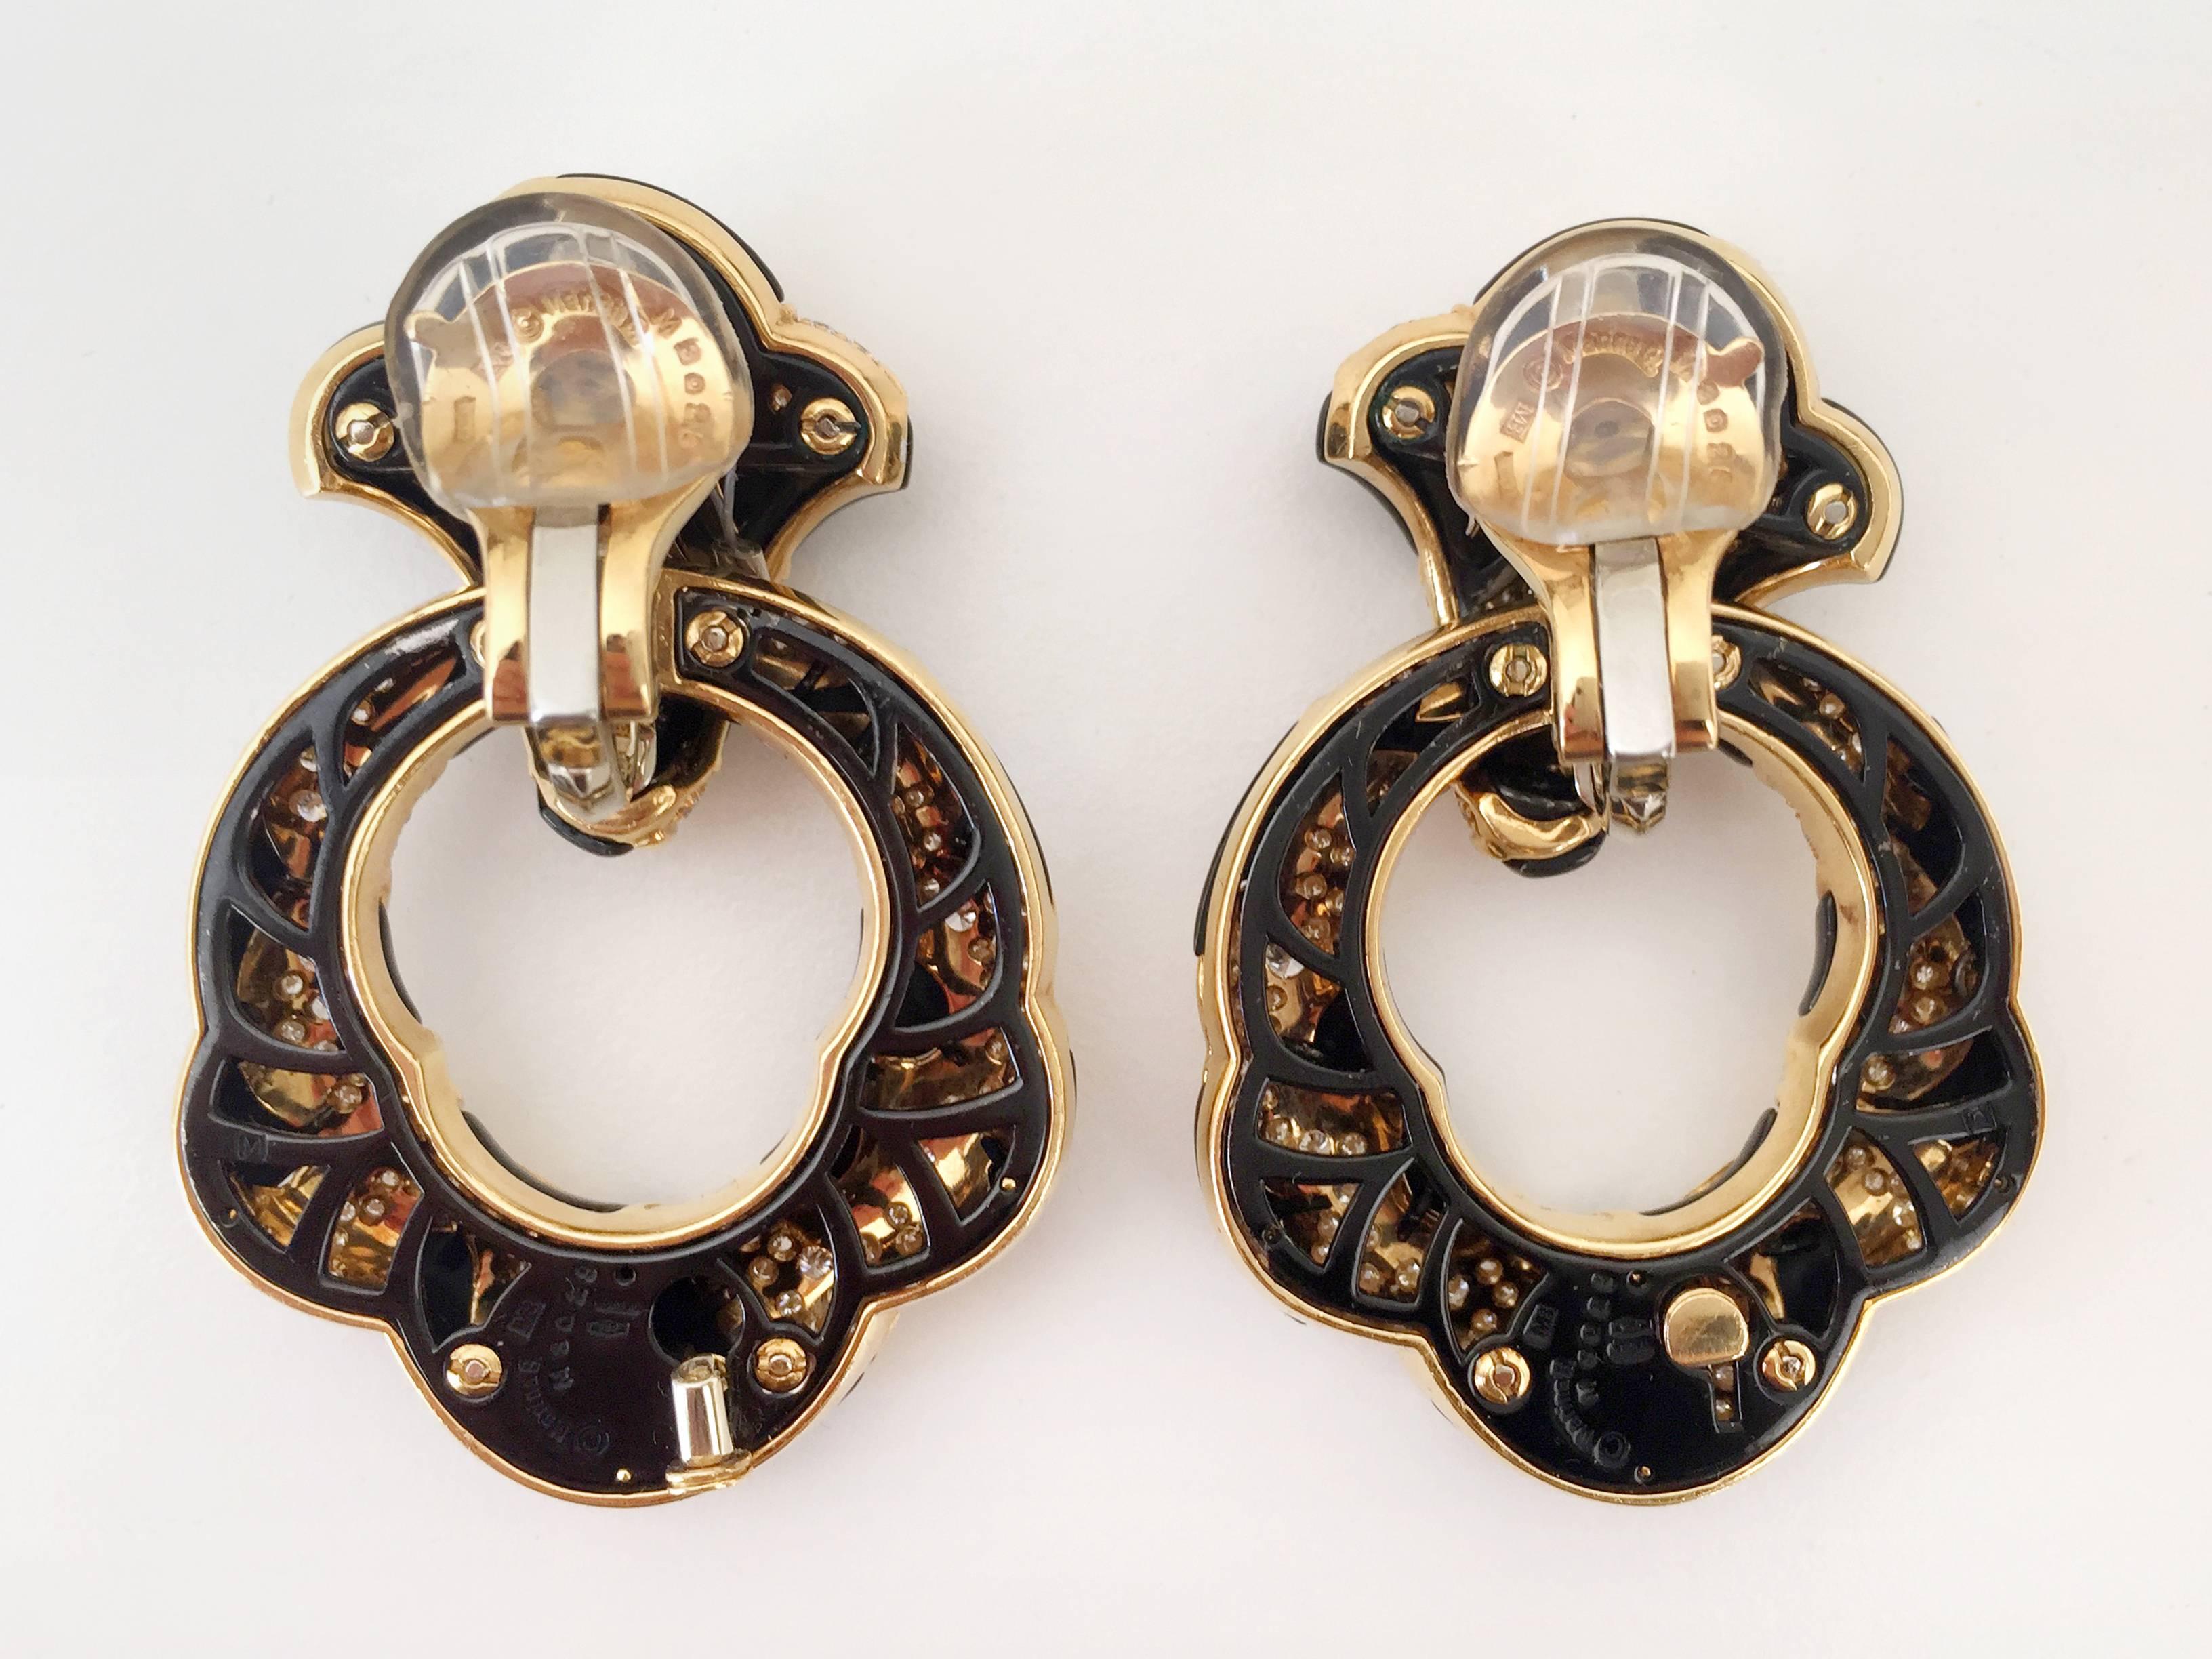 Iconic Ken Earrings , Blackened gold and white diamonds, mounted on 18kt yellow gold. Detachable and Transformable

Published on the Marina B. Book “The Art of Jewelry Design”. Made in Italy, circa 1983

Widely regarded as one of the most important